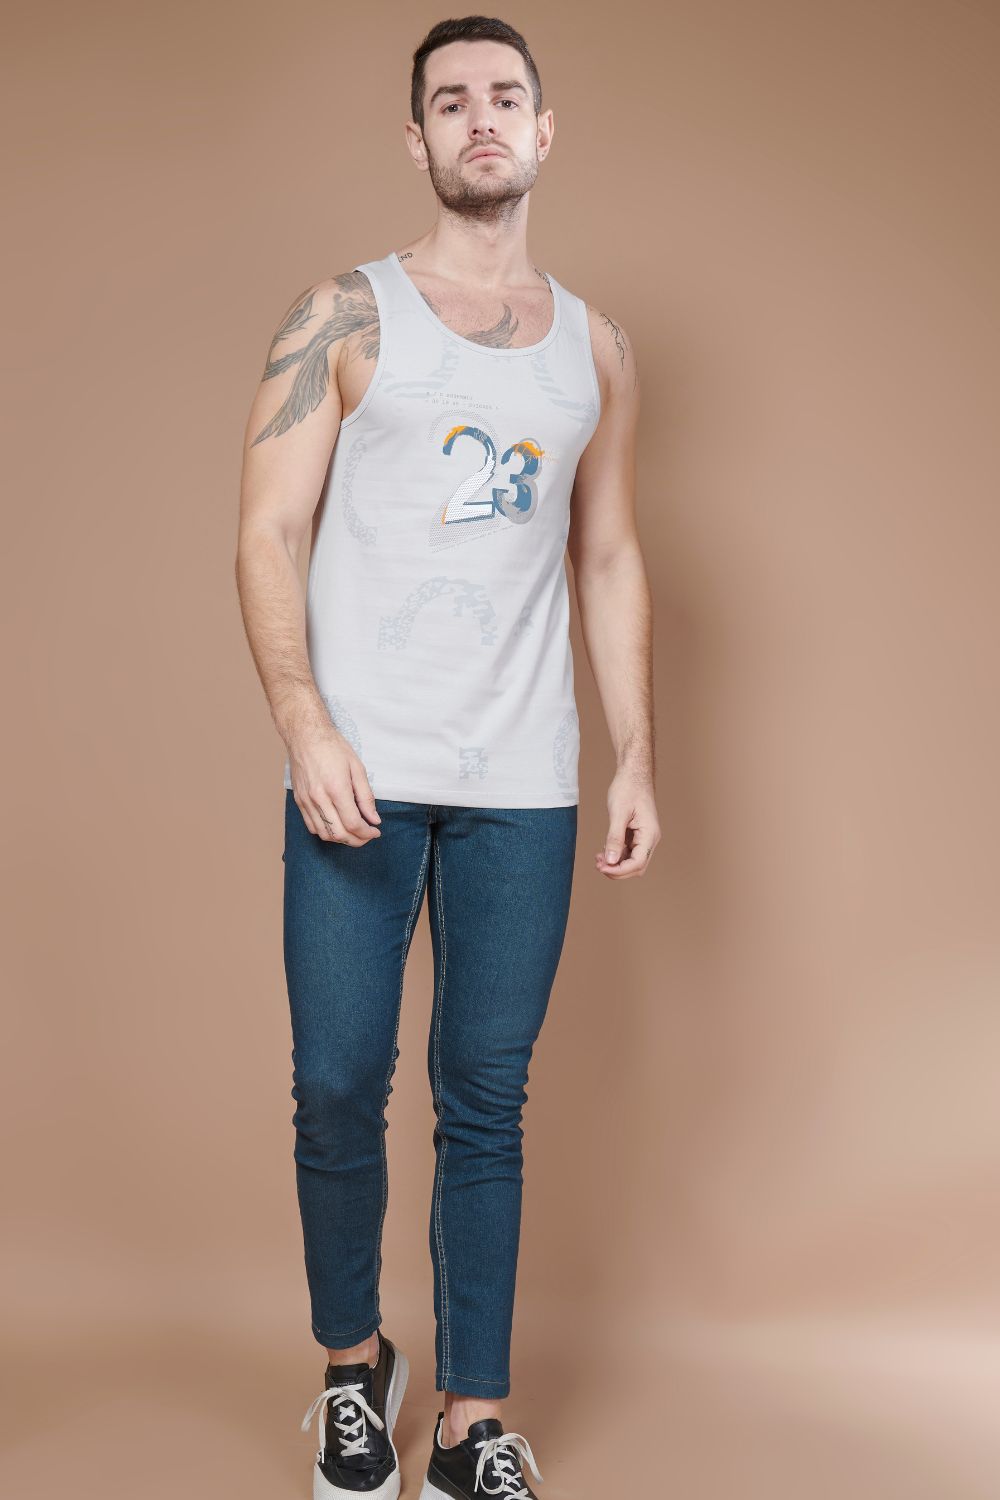 Vapour Blue colored cotton Sleeveless Printed Tank Tees for men, full view.